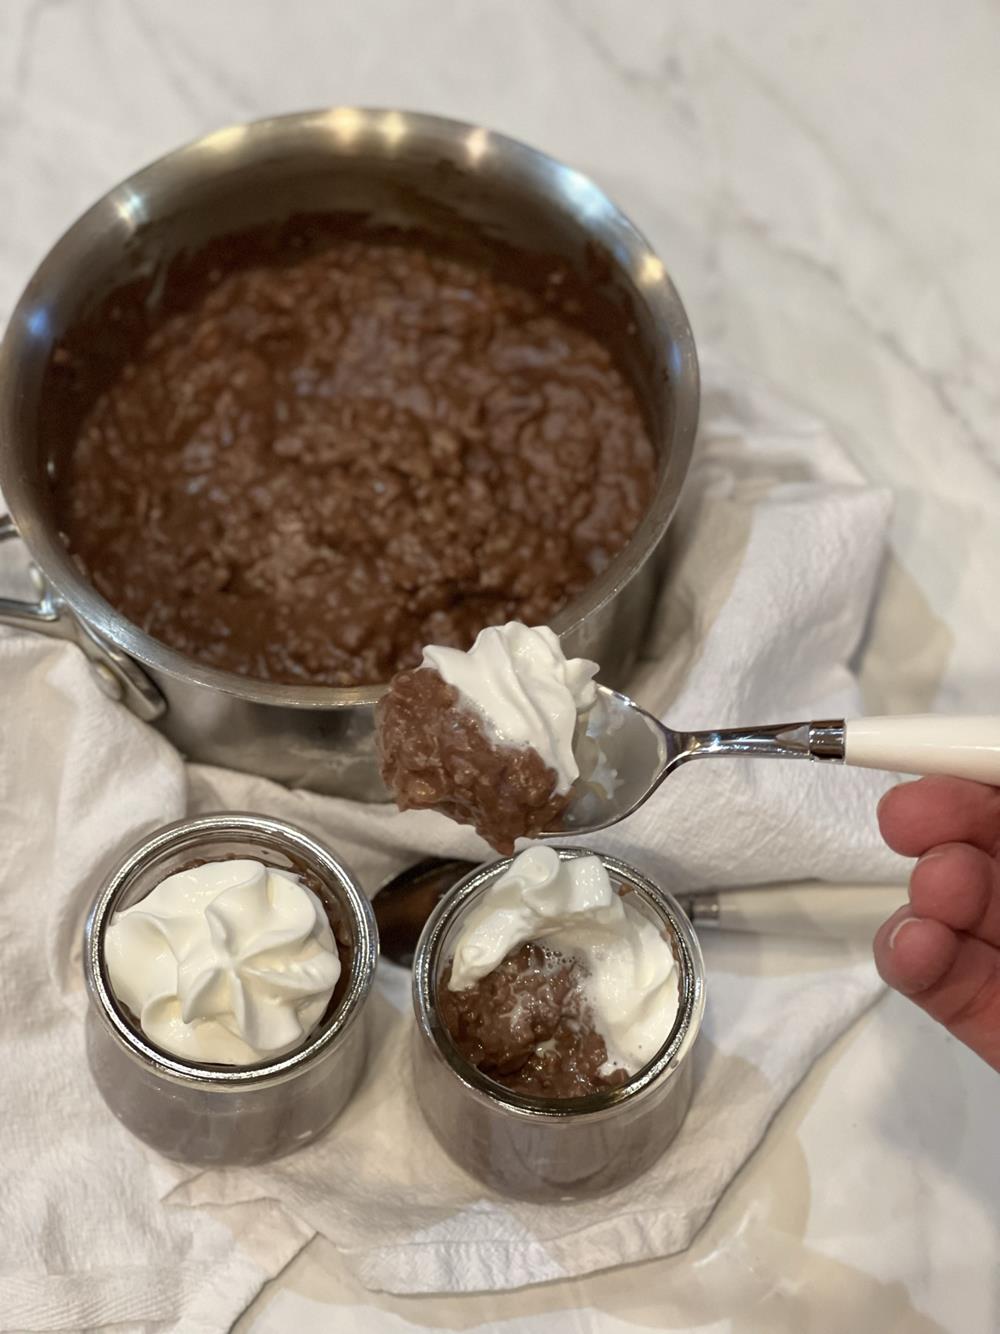 Chocolate rice pudding in pan and also glass dish with spoon